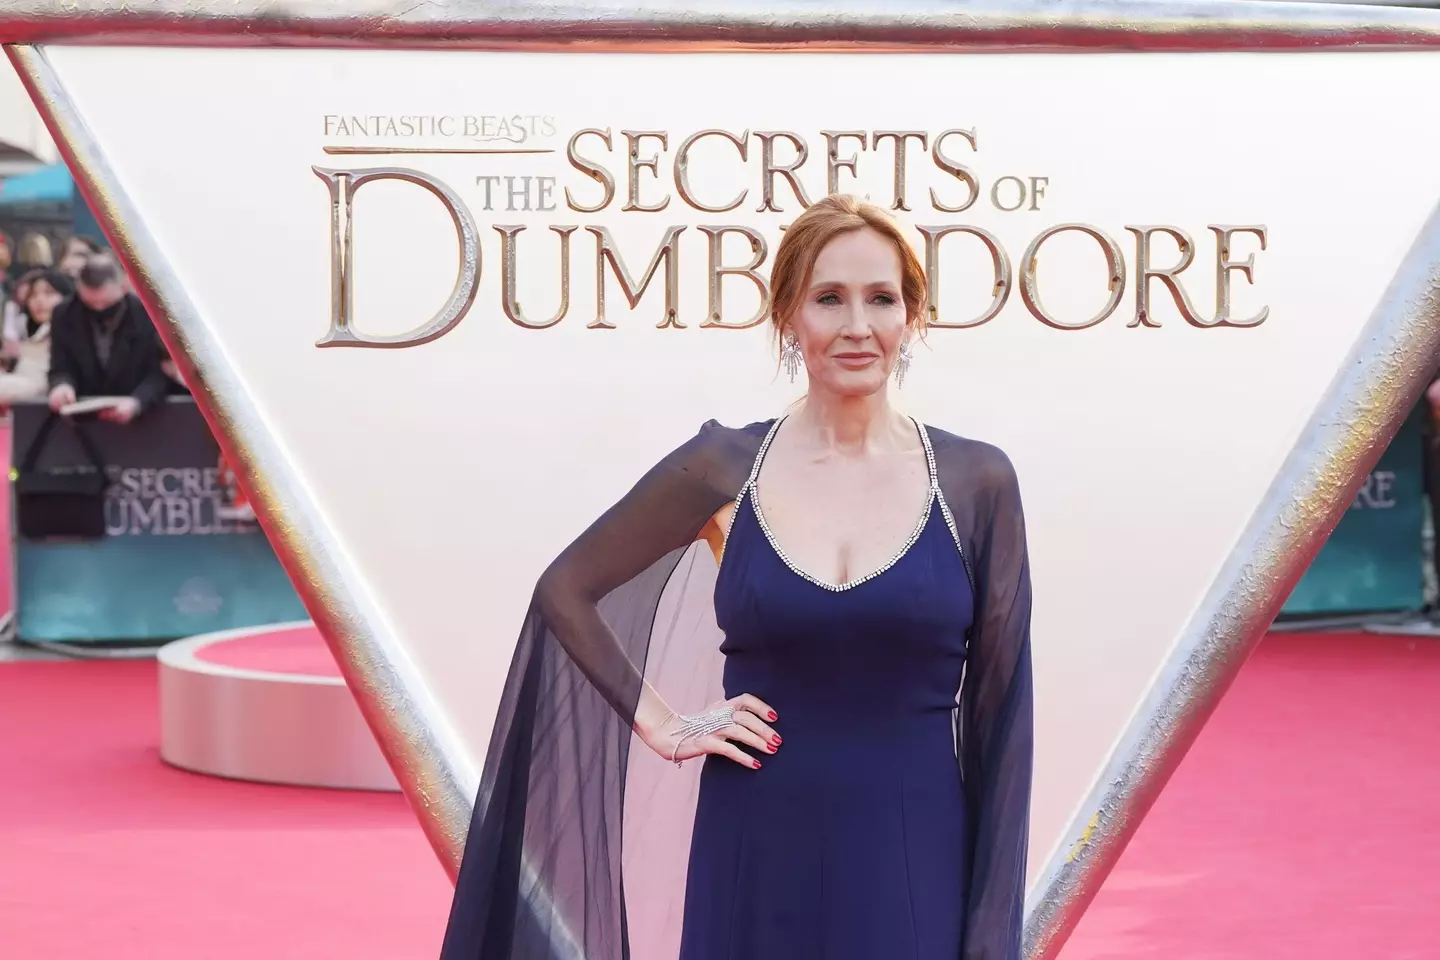 JK Rowling is set to be an executive producer of the new series.